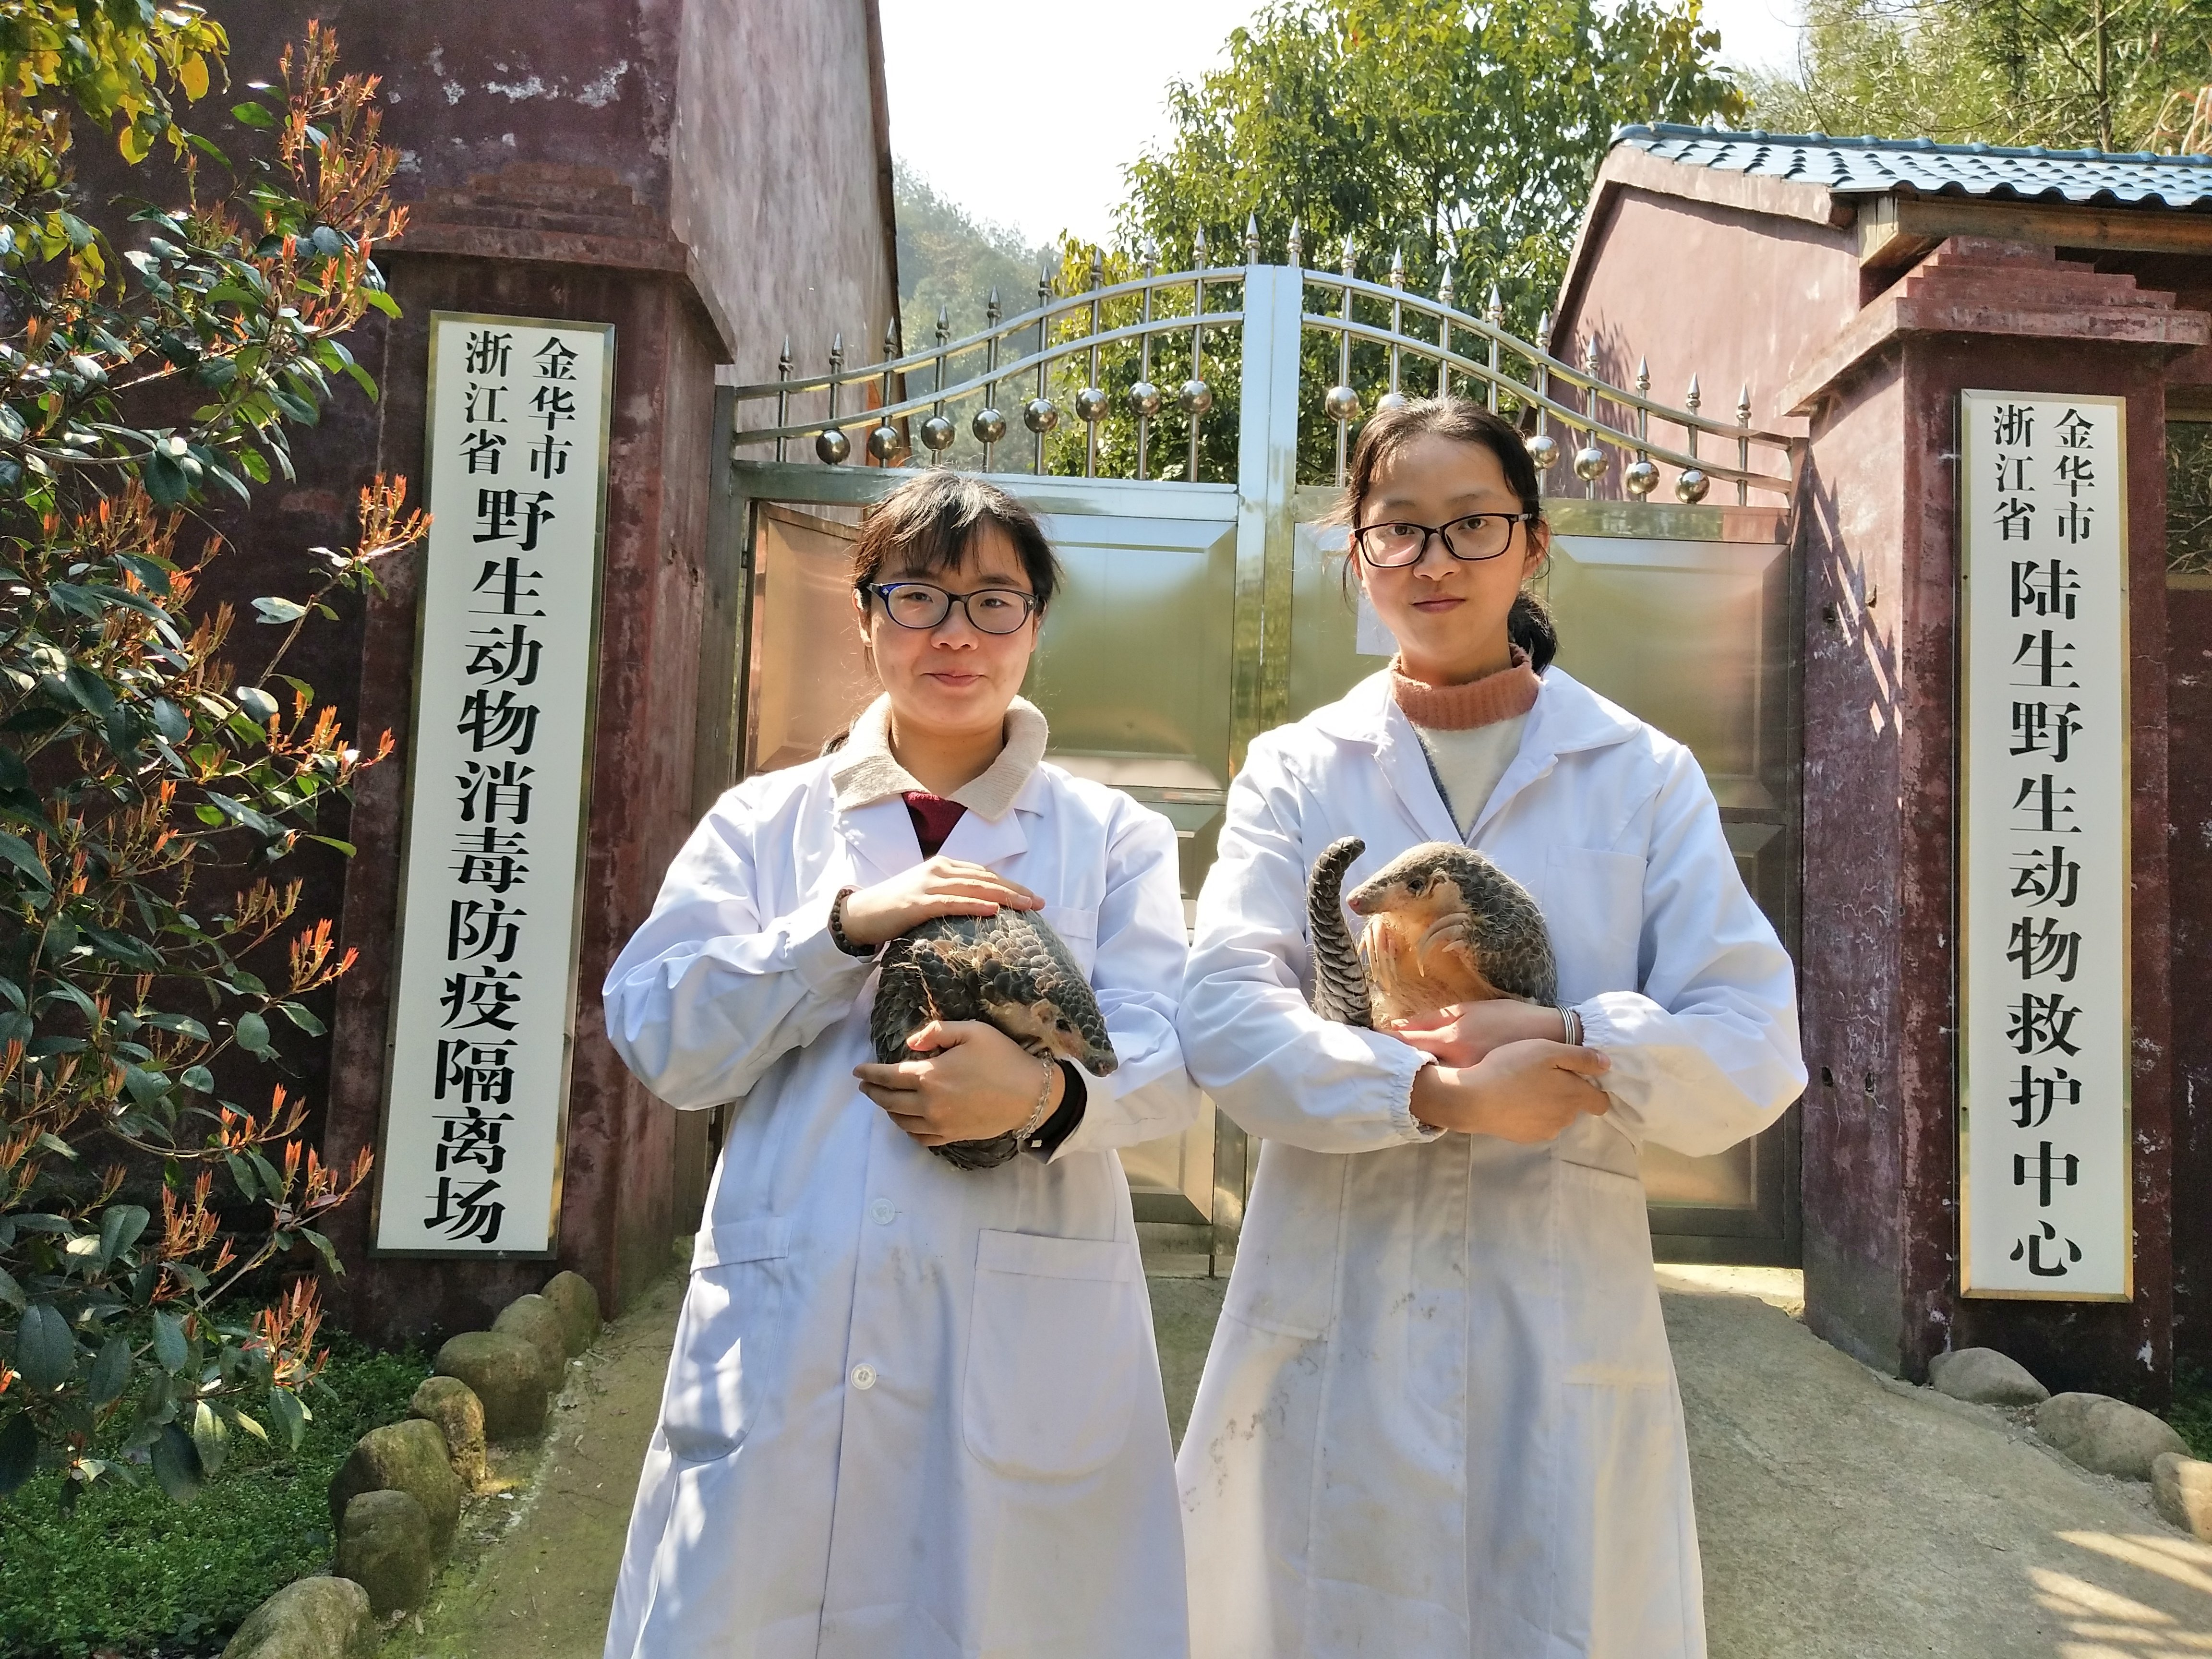 Xiao Chen (left) and her colleague in Jinhua Wildlife Rescue Centre along with two rescued Chinese pangolins Rou Rou and Tuan Tuan on March 5, 2018 [image courtesy: Jinhua Wildlife Rescue Centre]